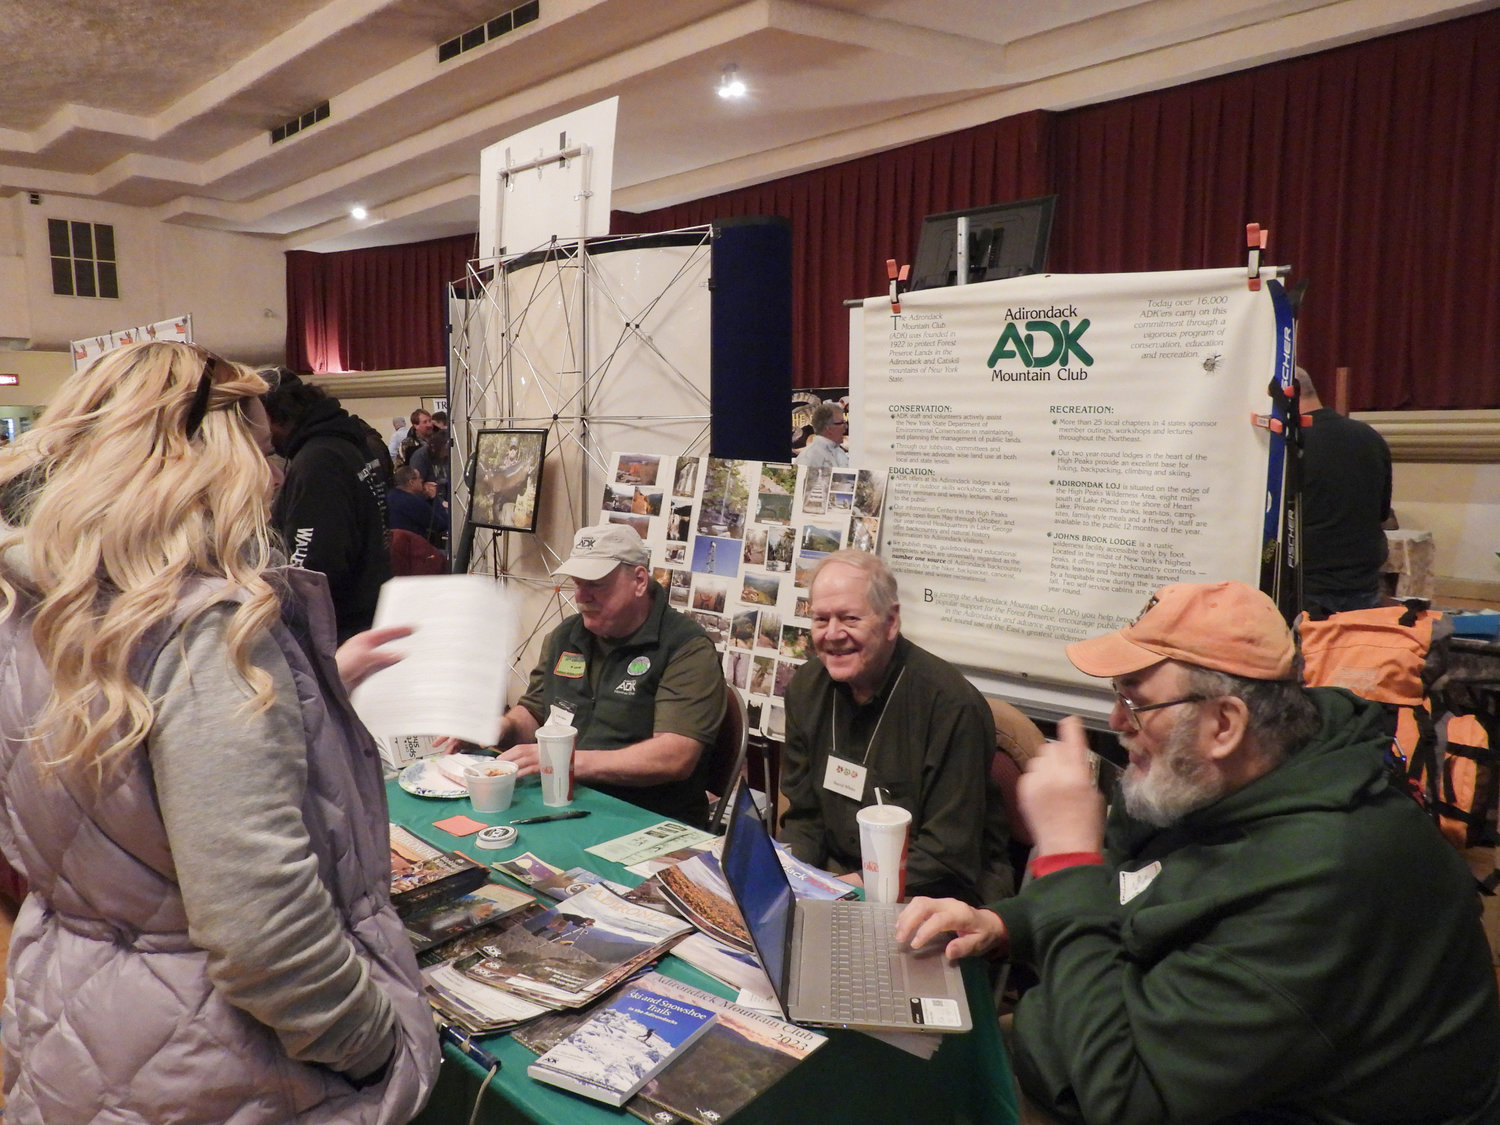 Members of the Adirondack Mountain Club speak with prospective members at the CNY Sportsman Show on Saturday, Feb. 4 at the Kallet Civic Center in Oneida.